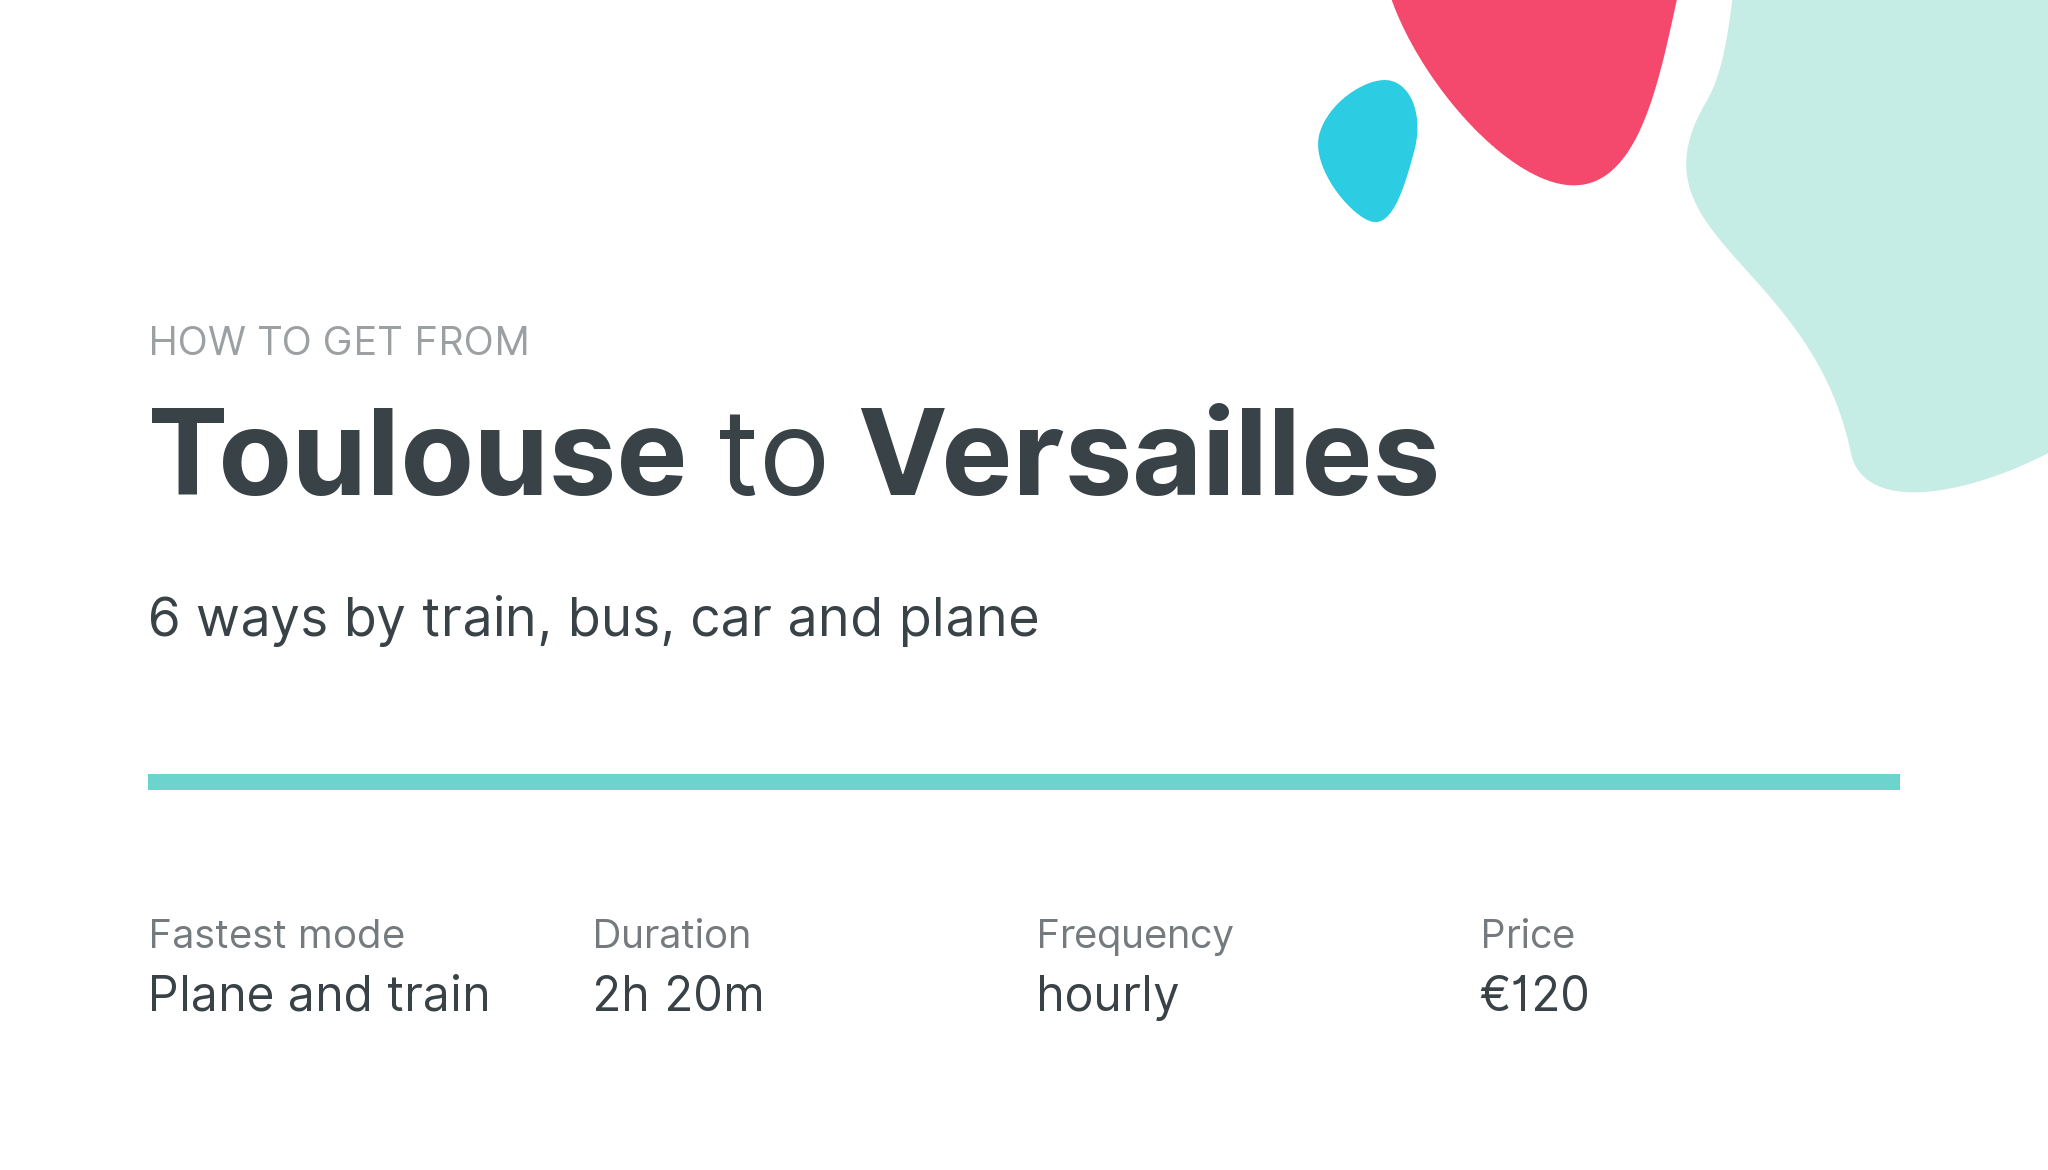 How do I get from Toulouse to Versailles